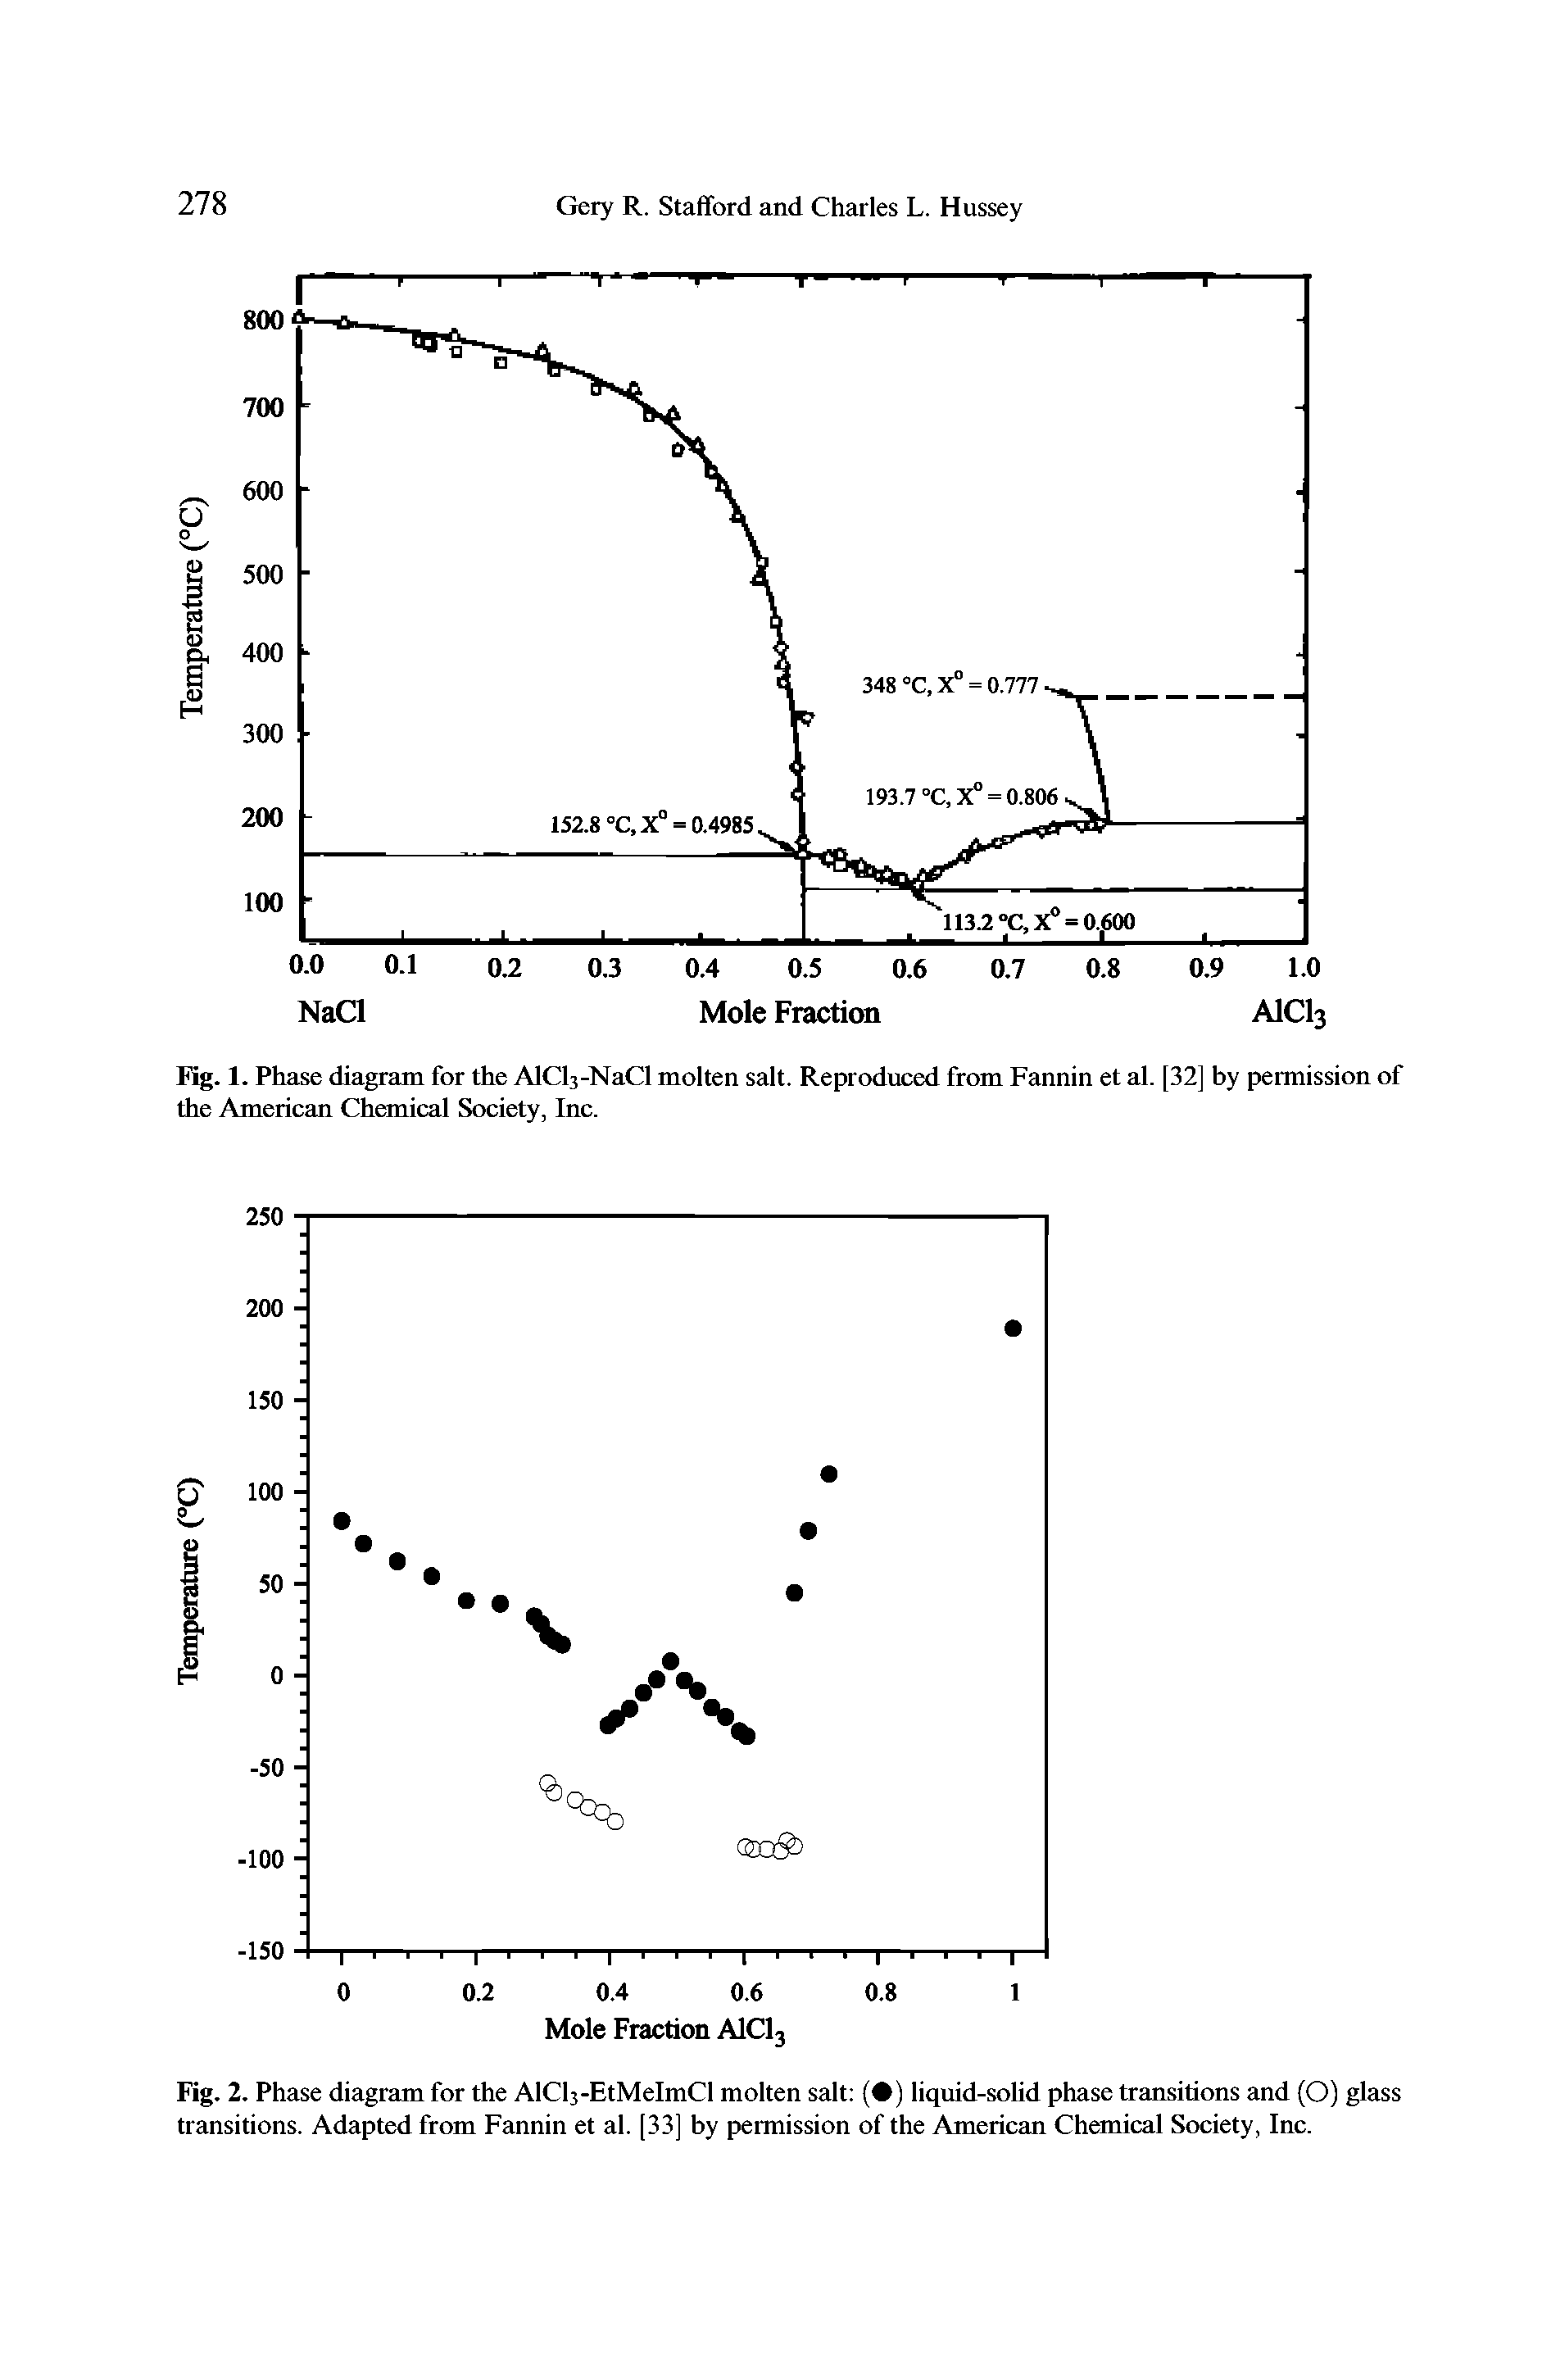 Fig. 1. Phase diagram for the AlCl3-NaCl molten salt. Reproduced from Fannin et al. [32] by permission of the American Chemical Society, Inc.